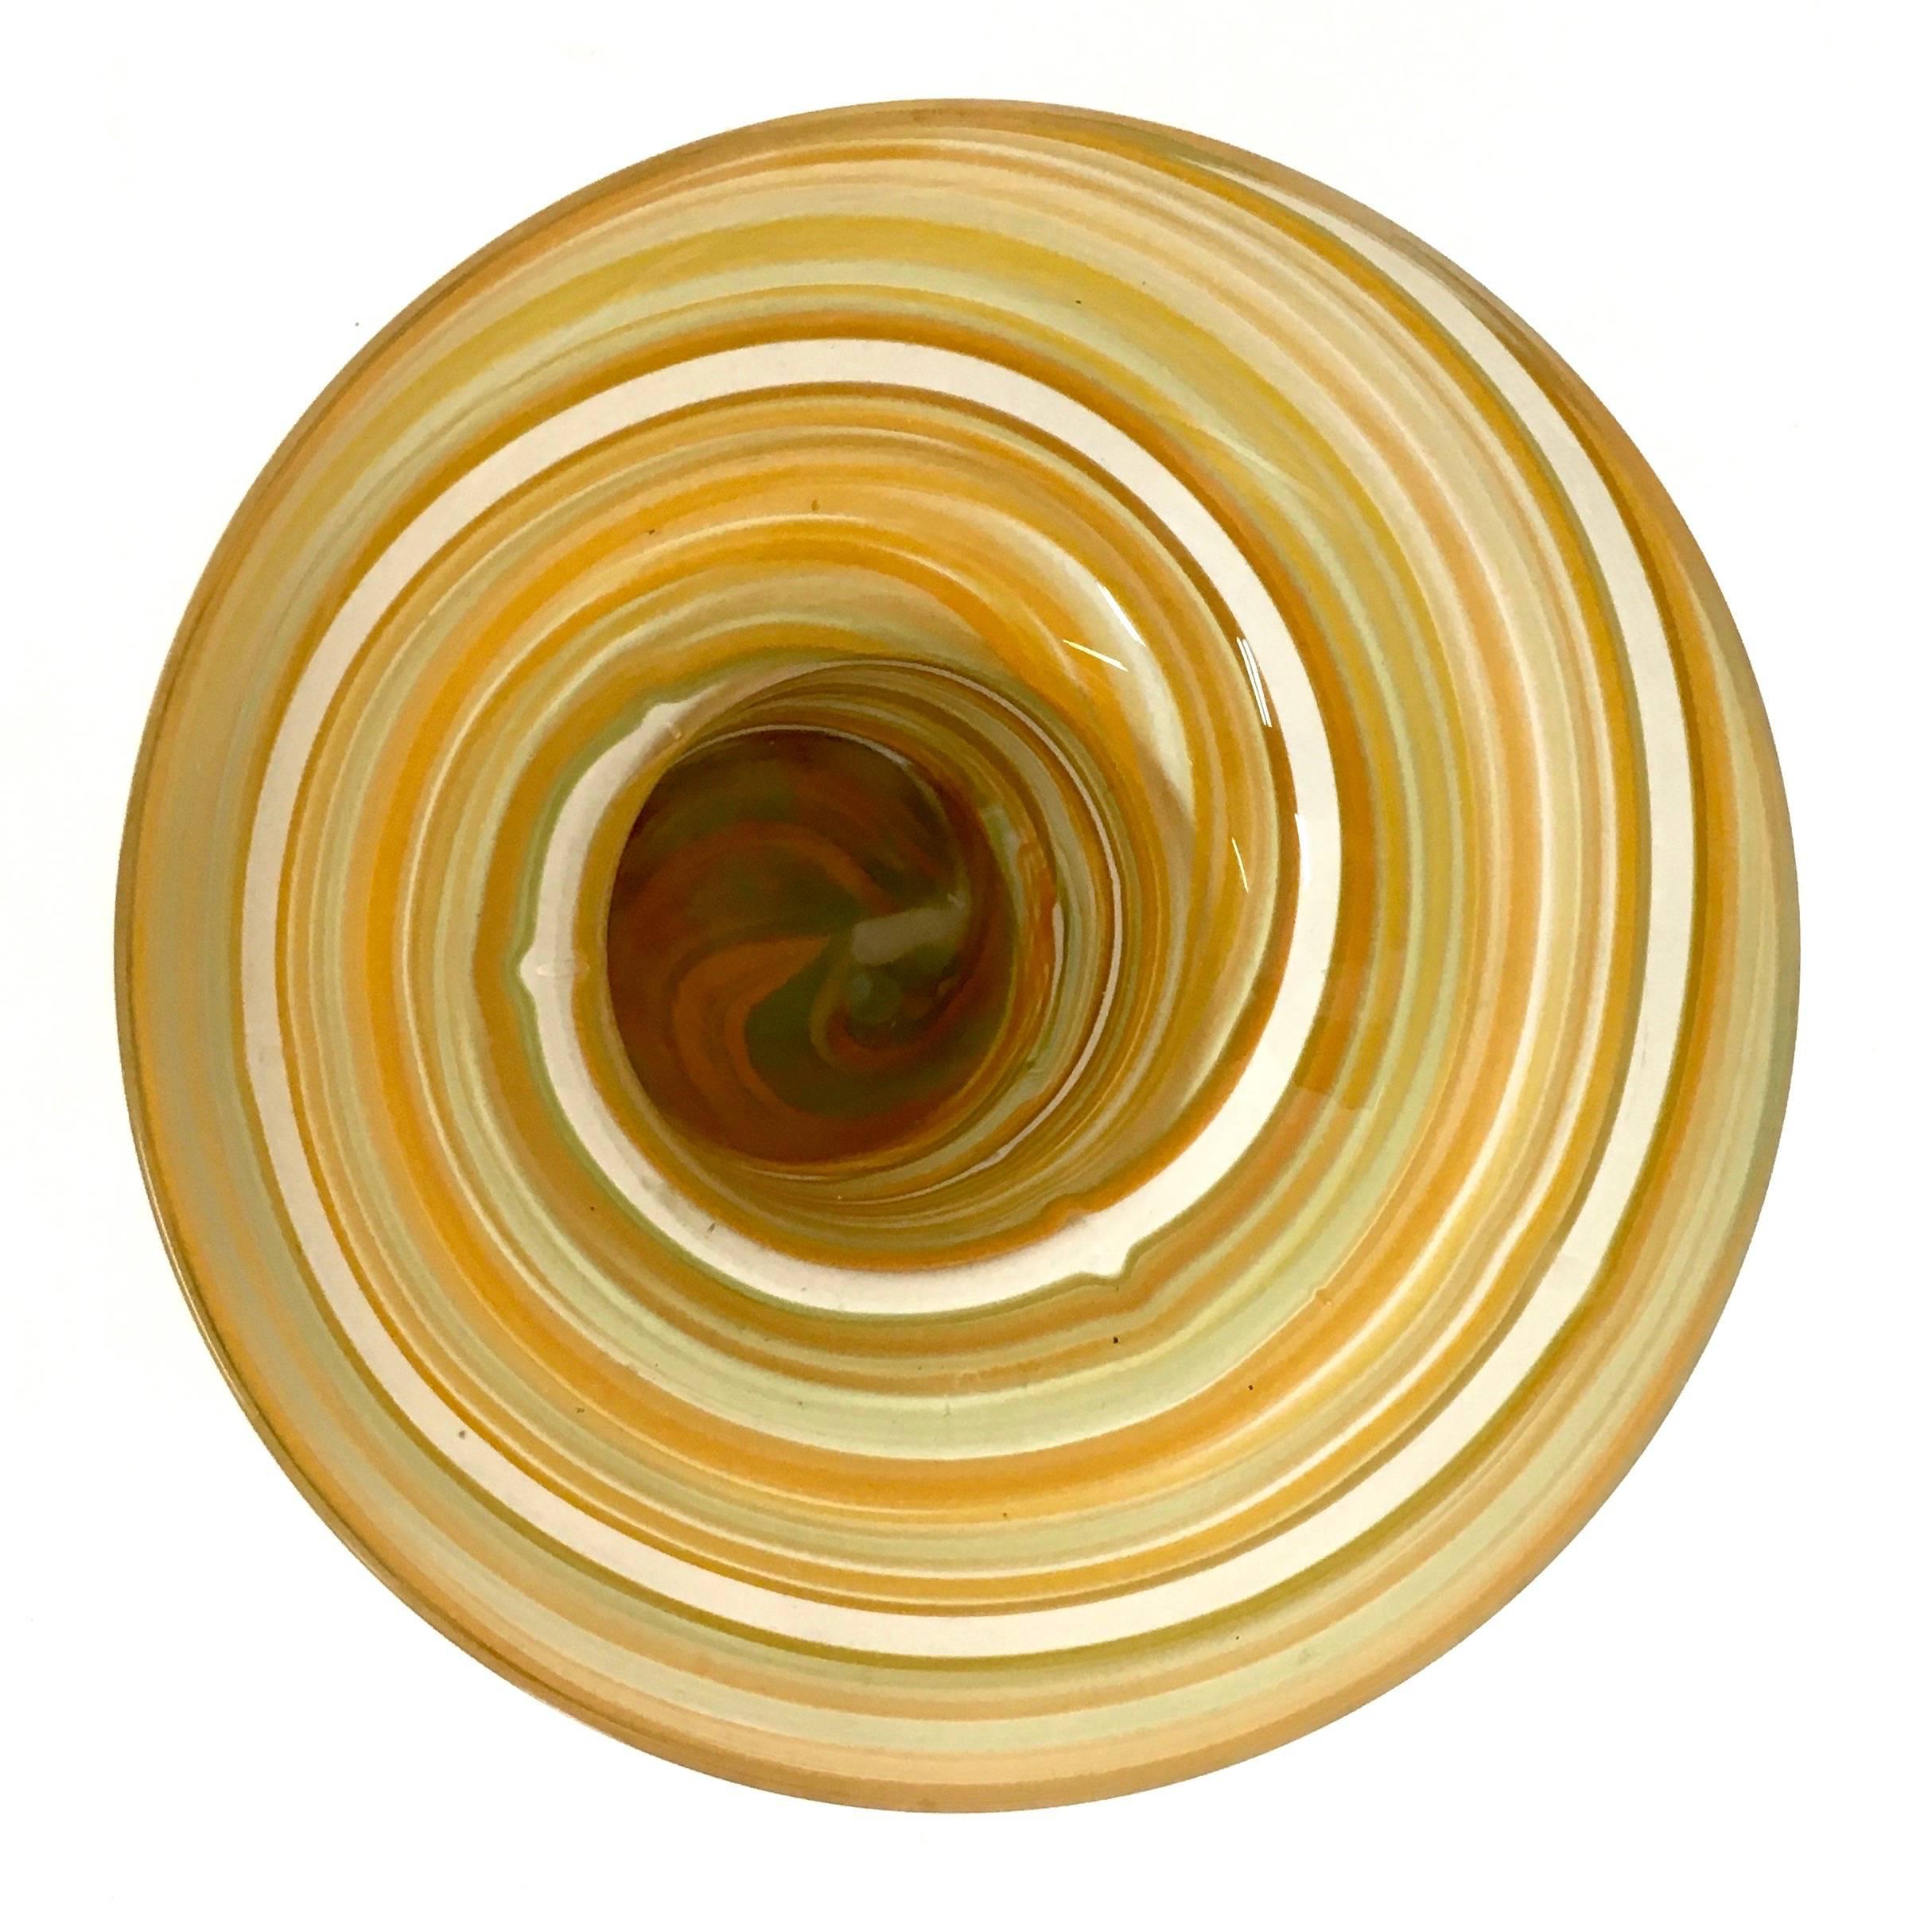 Blown Glass Set of Bowl and Vase by VeArt, 1970s